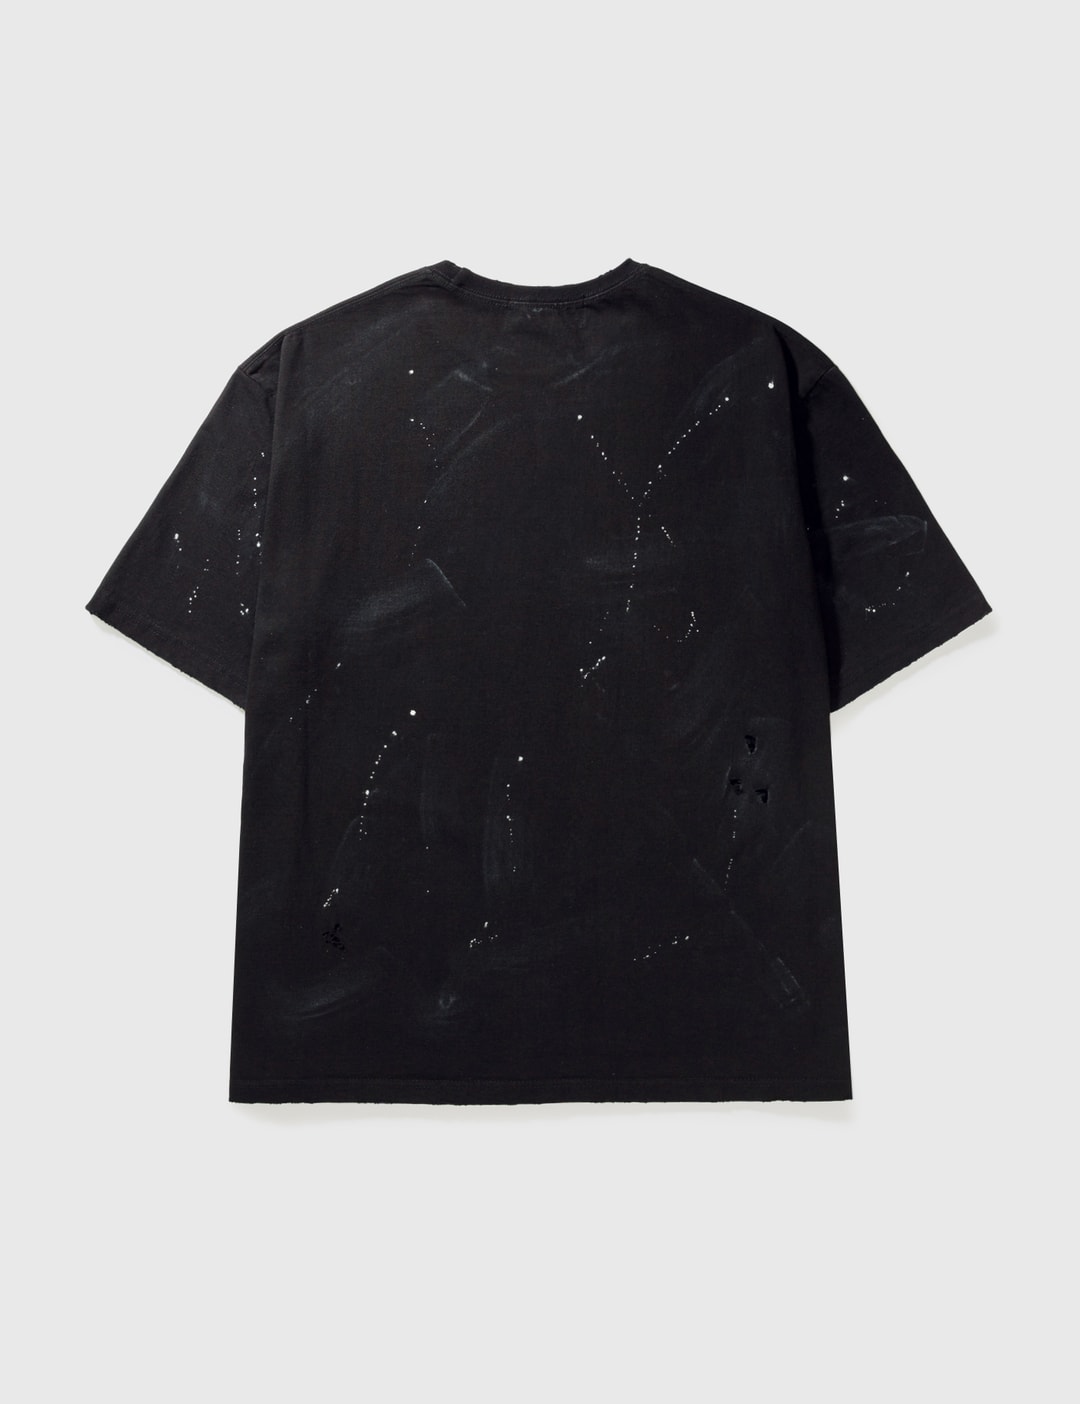 Someit - K.O.K T-shirt | HBX - Globally Curated Fashion and Lifestyle ...